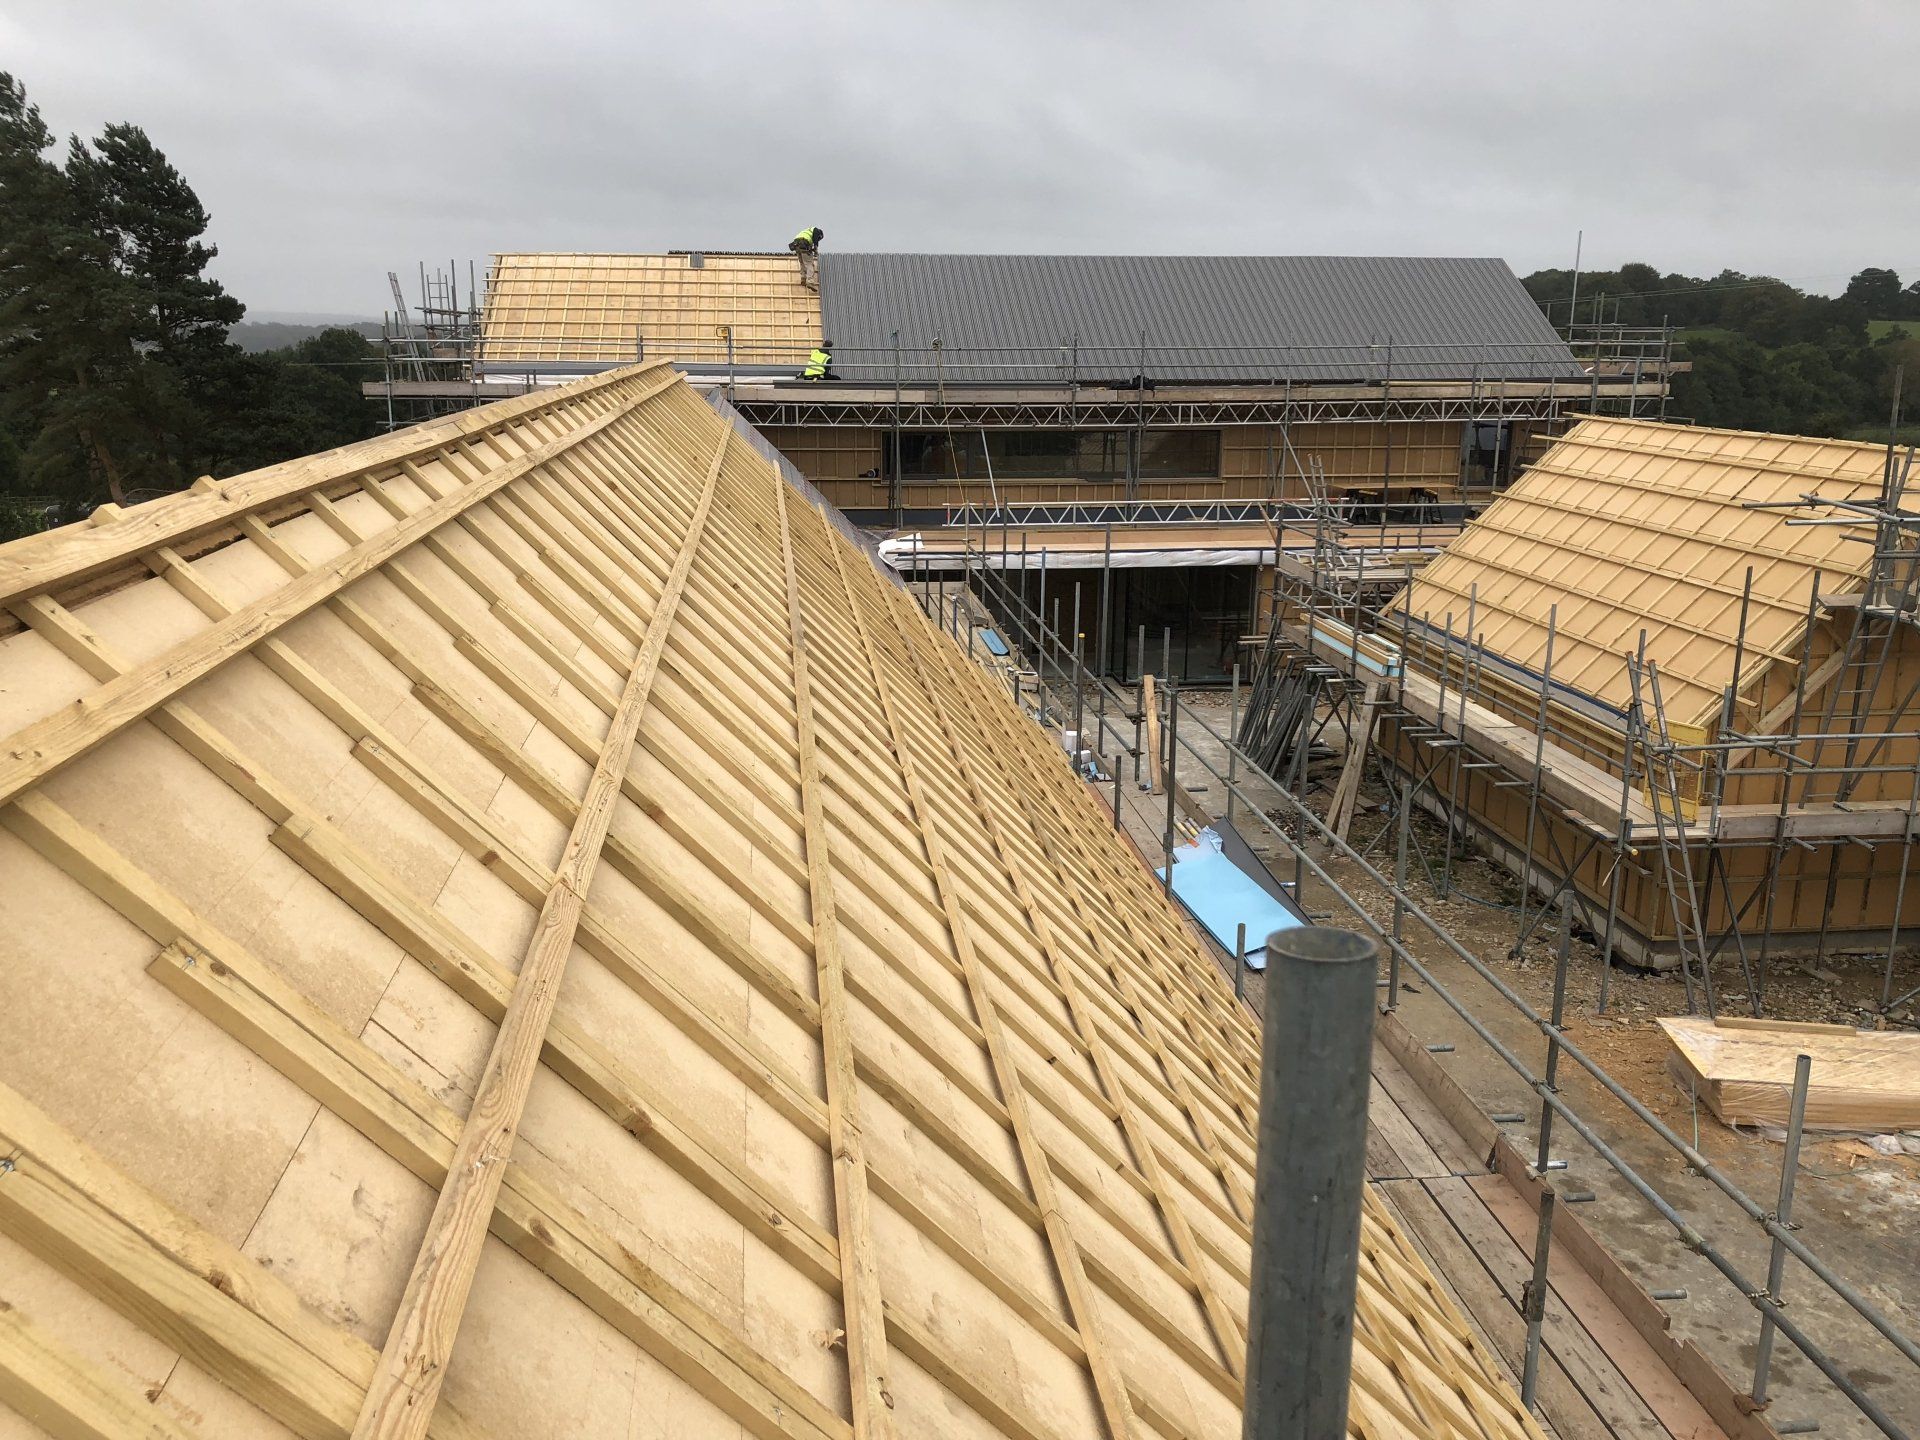 Lingfield Timber Frame Construction.  Builder. Building contractor. Construction. Carpentry. Carpentry contractor. Extensions. New builds. Timber frame fabrication and erection. Design and build. Kitchen installations. Horsham. Surrey. Reigate. Redhill. Dorking. Crawley. West Sussex. Cranleigh.